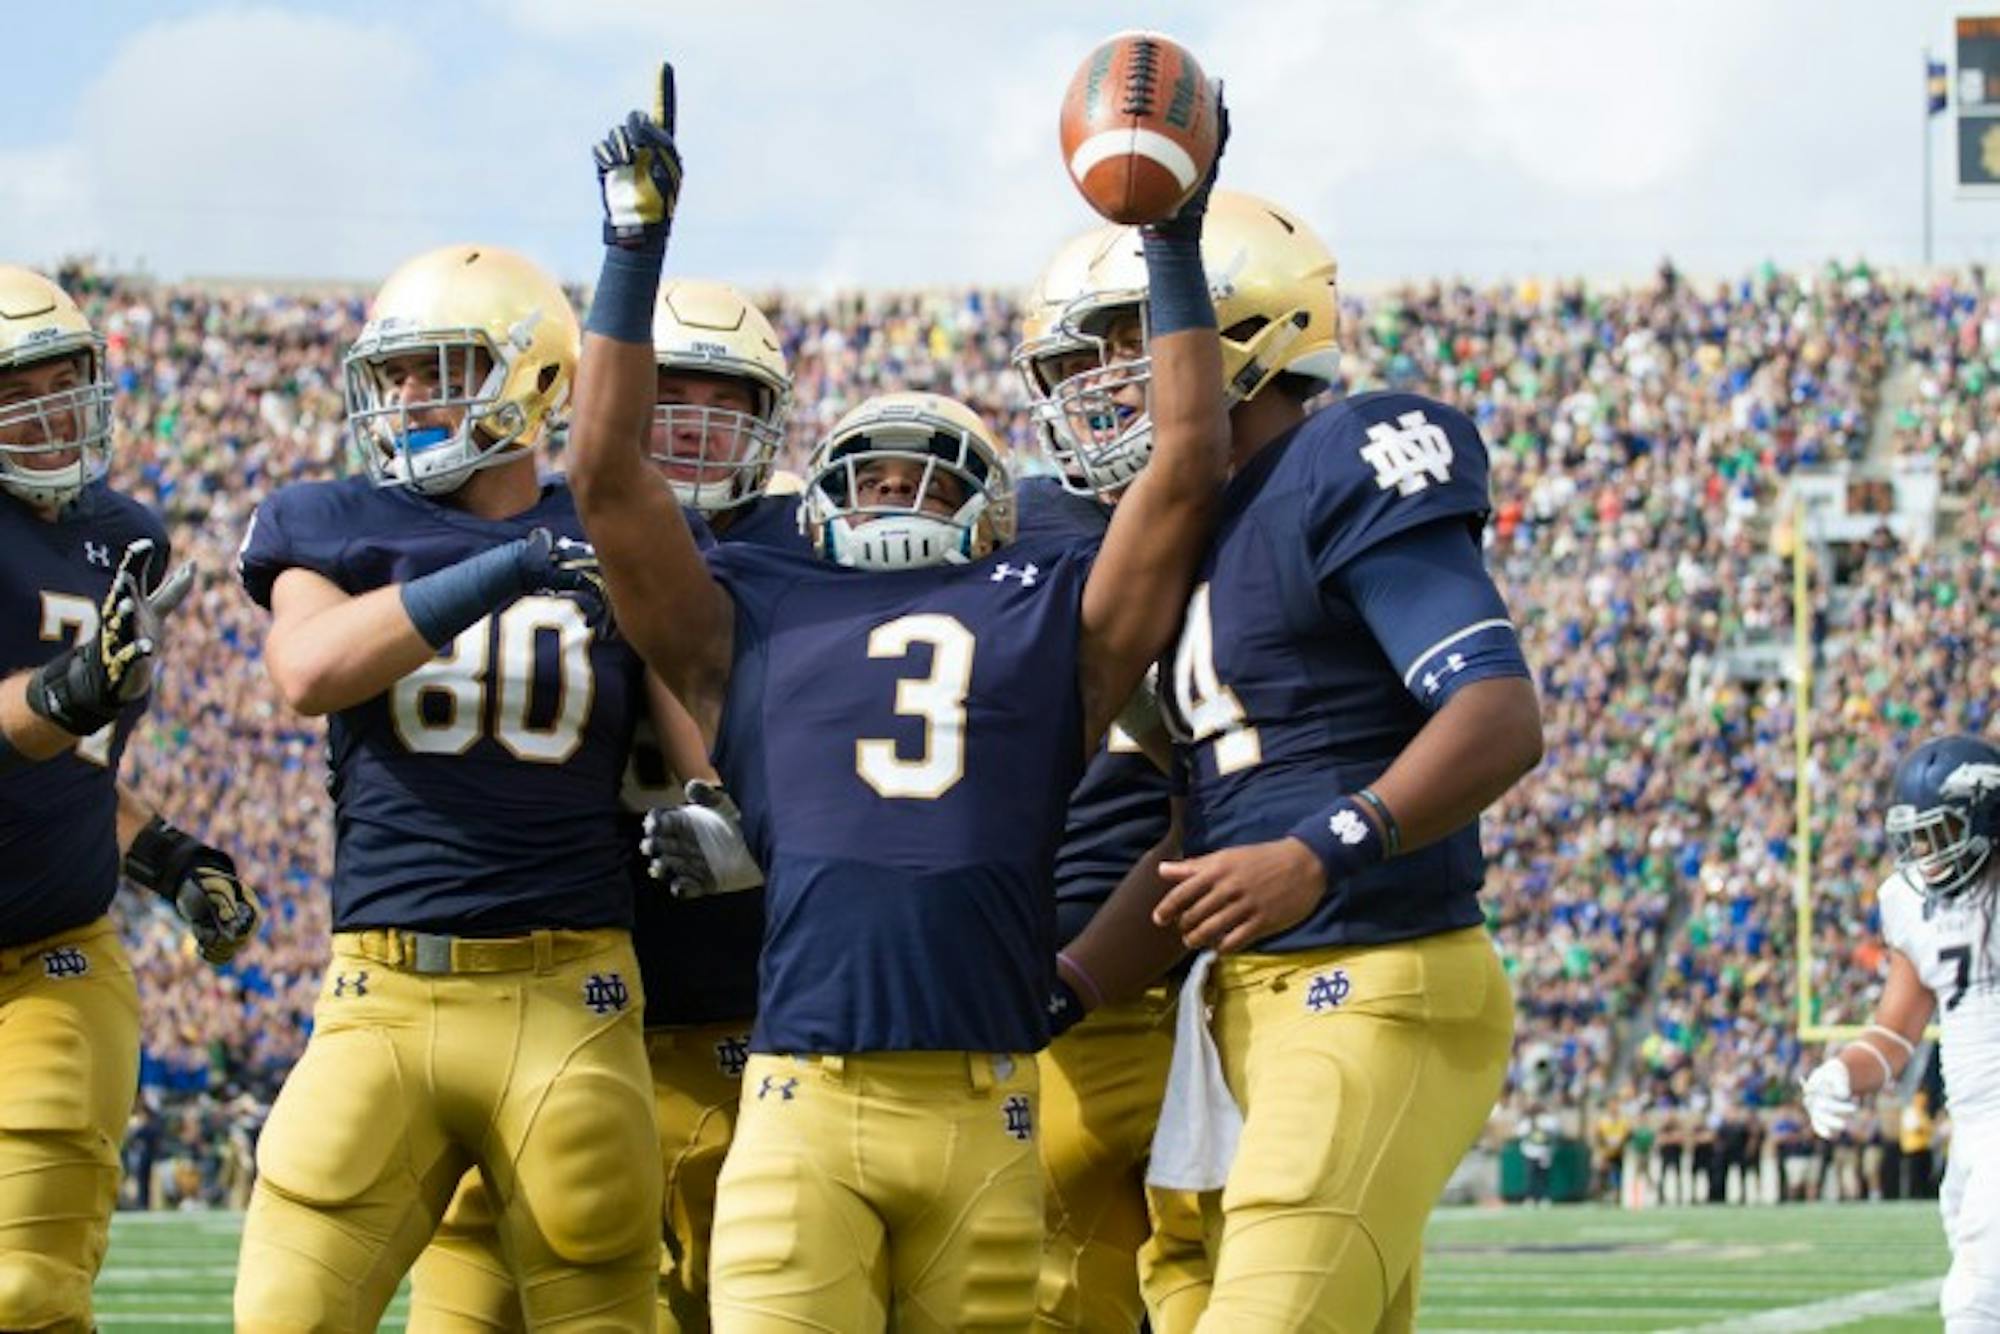 Irish sophomore receiver C.J. Sanders, center, celebrates with teammates following his touchdown Saturday in Notre Dame’s 39-10 win over Nevada.